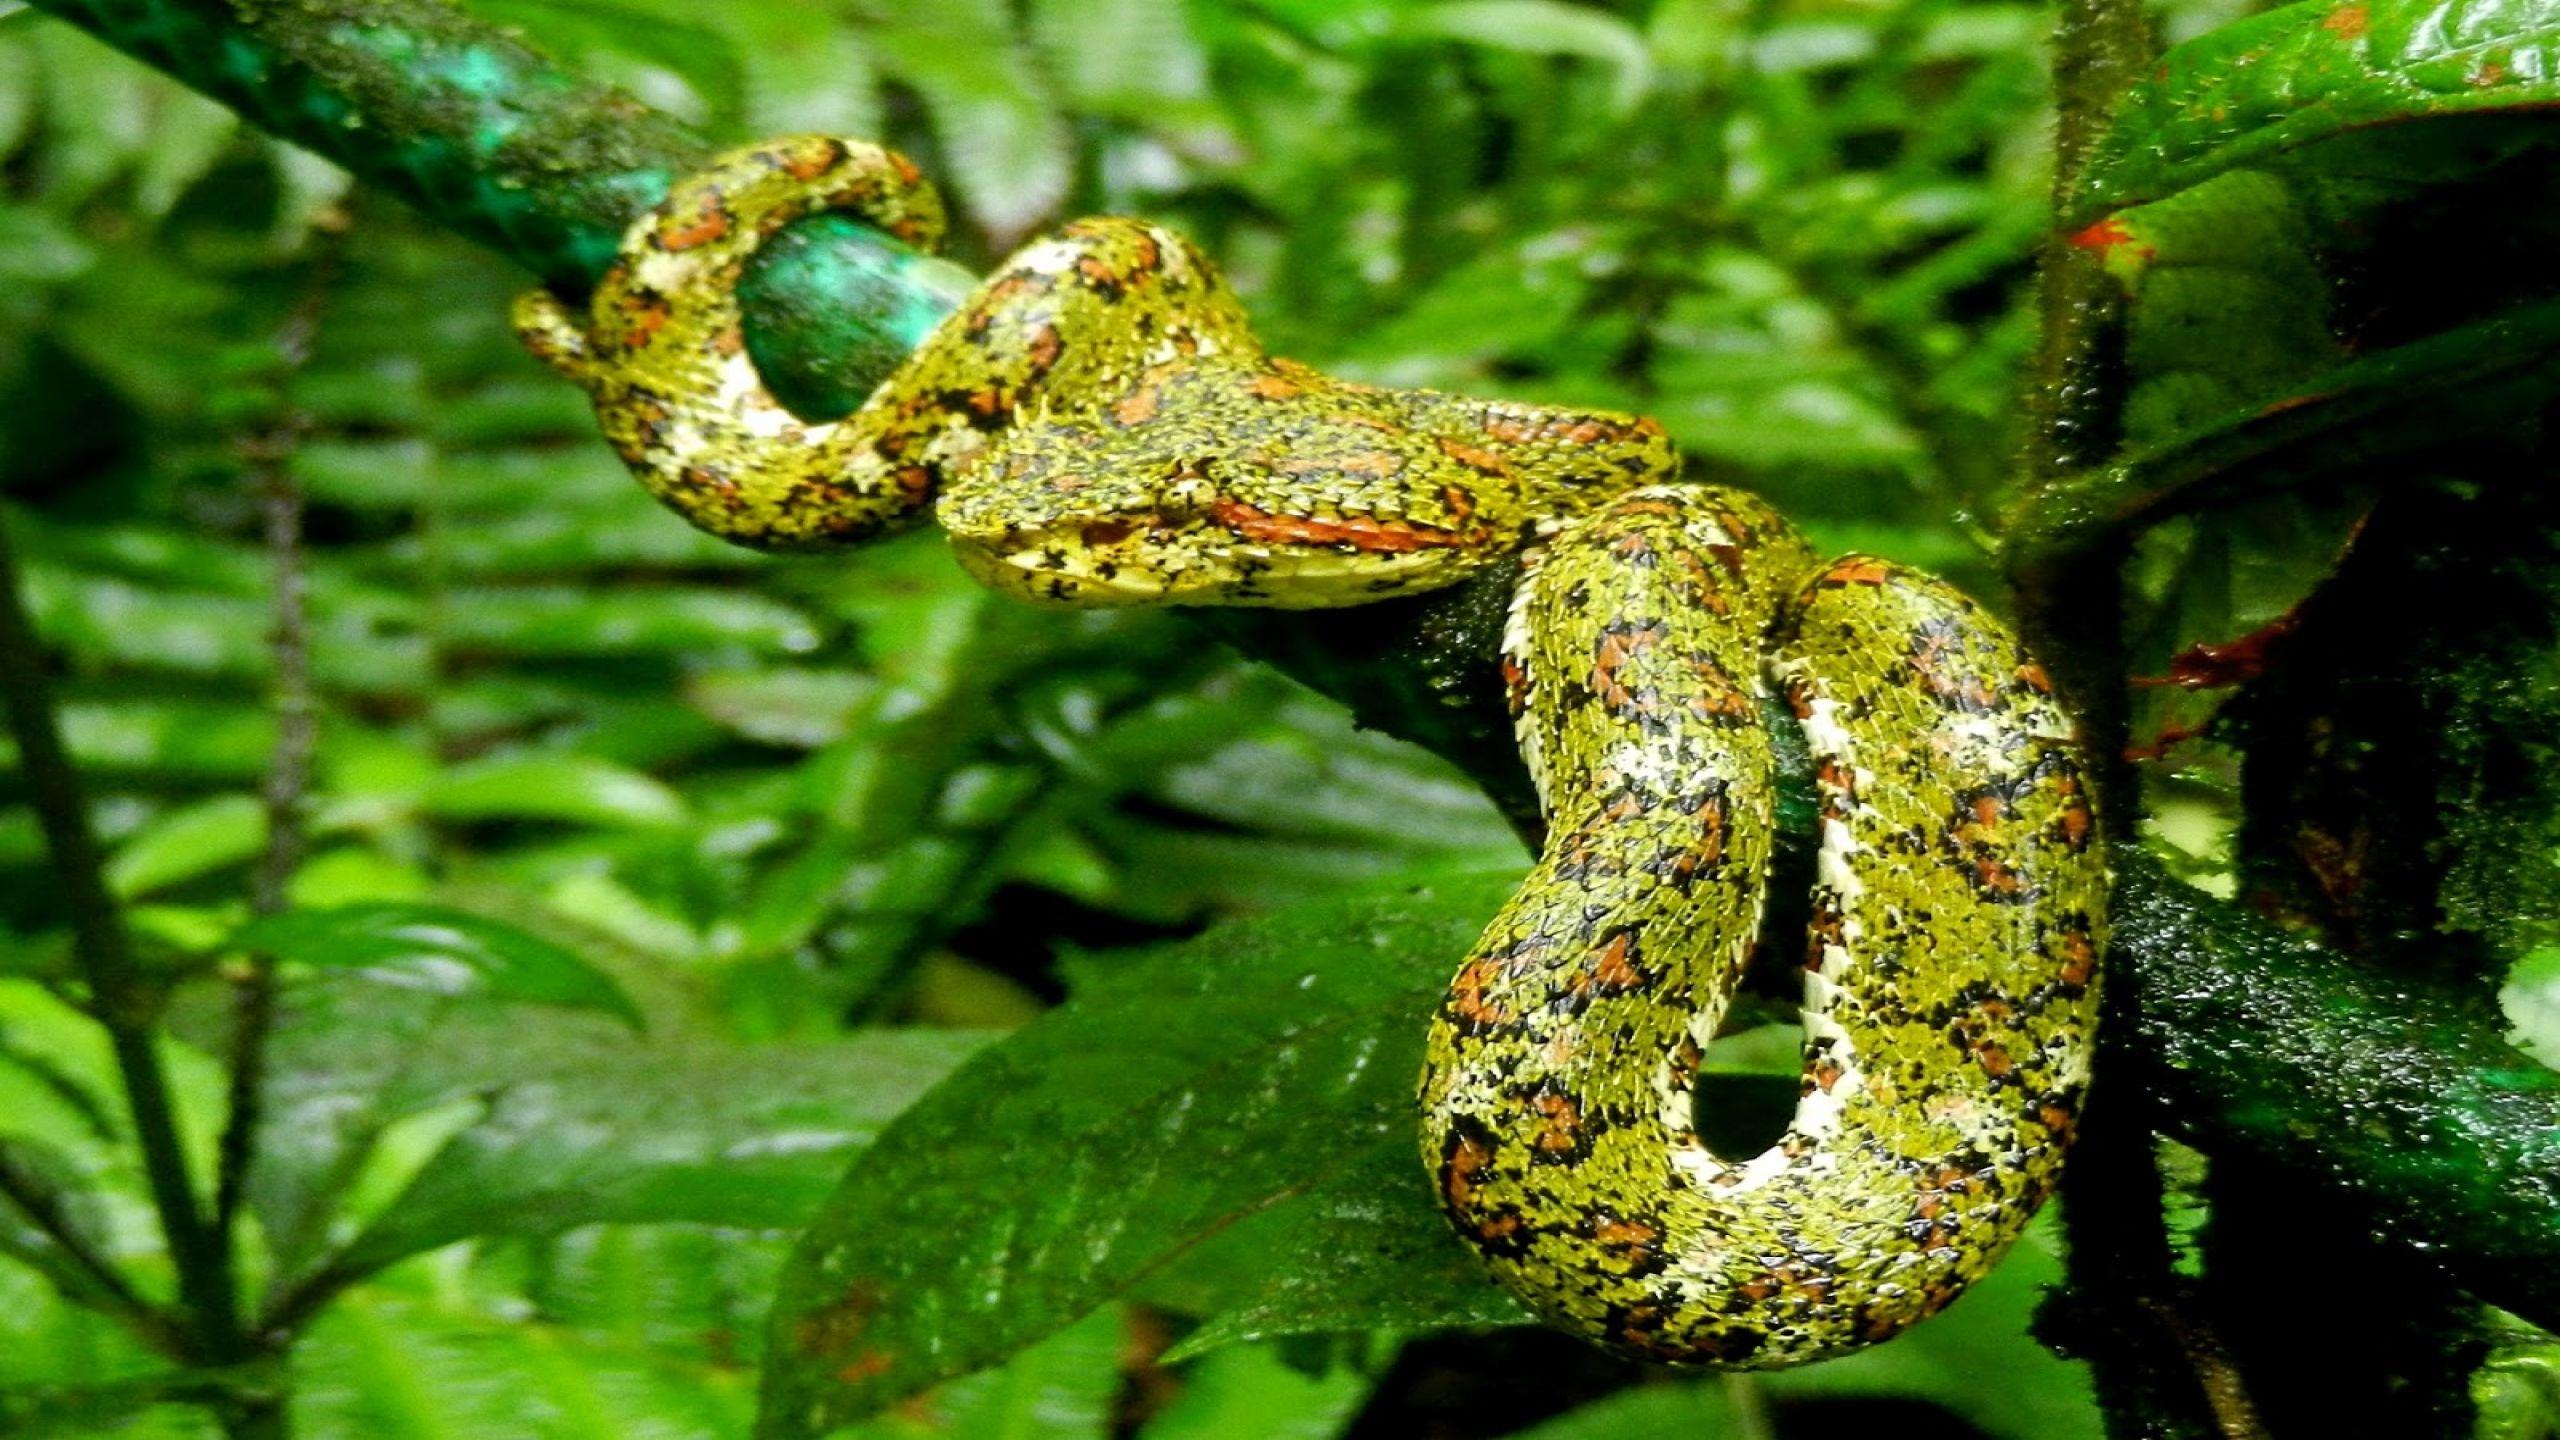 image of pit viper snakes wallpaper